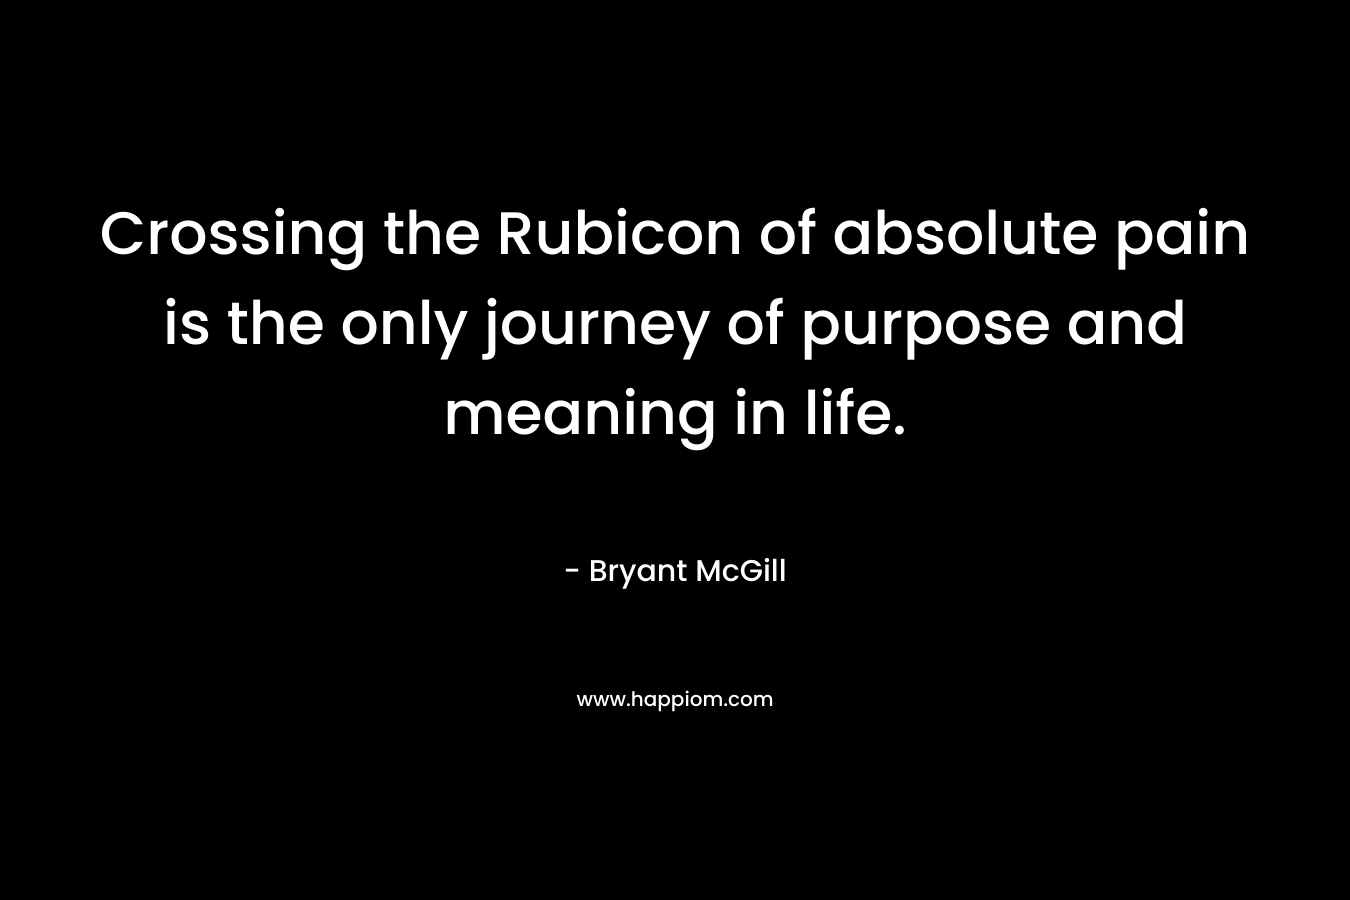 Crossing the Rubicon of absolute pain is the only journey of purpose and meaning in life. – Bryant McGill